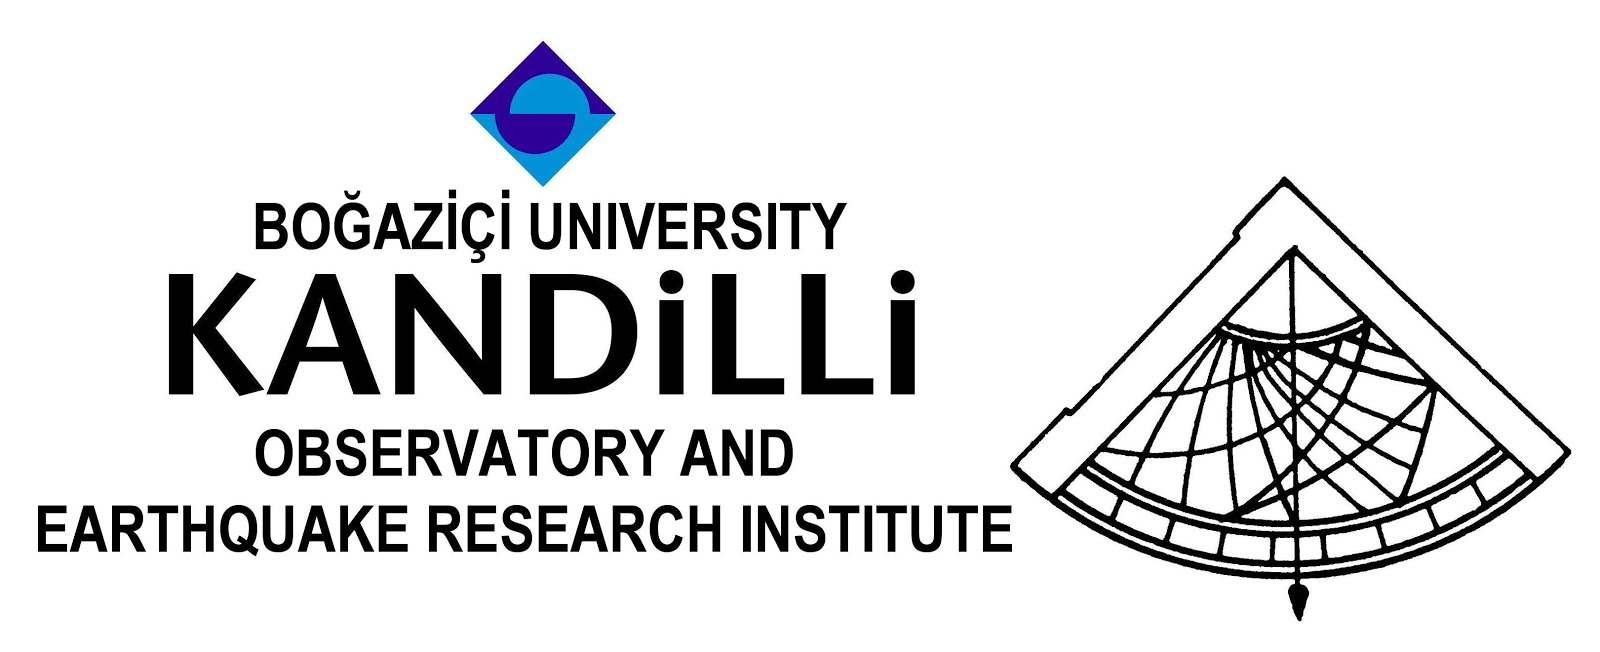 Kandilli Observatory And Earthquake Research Institute